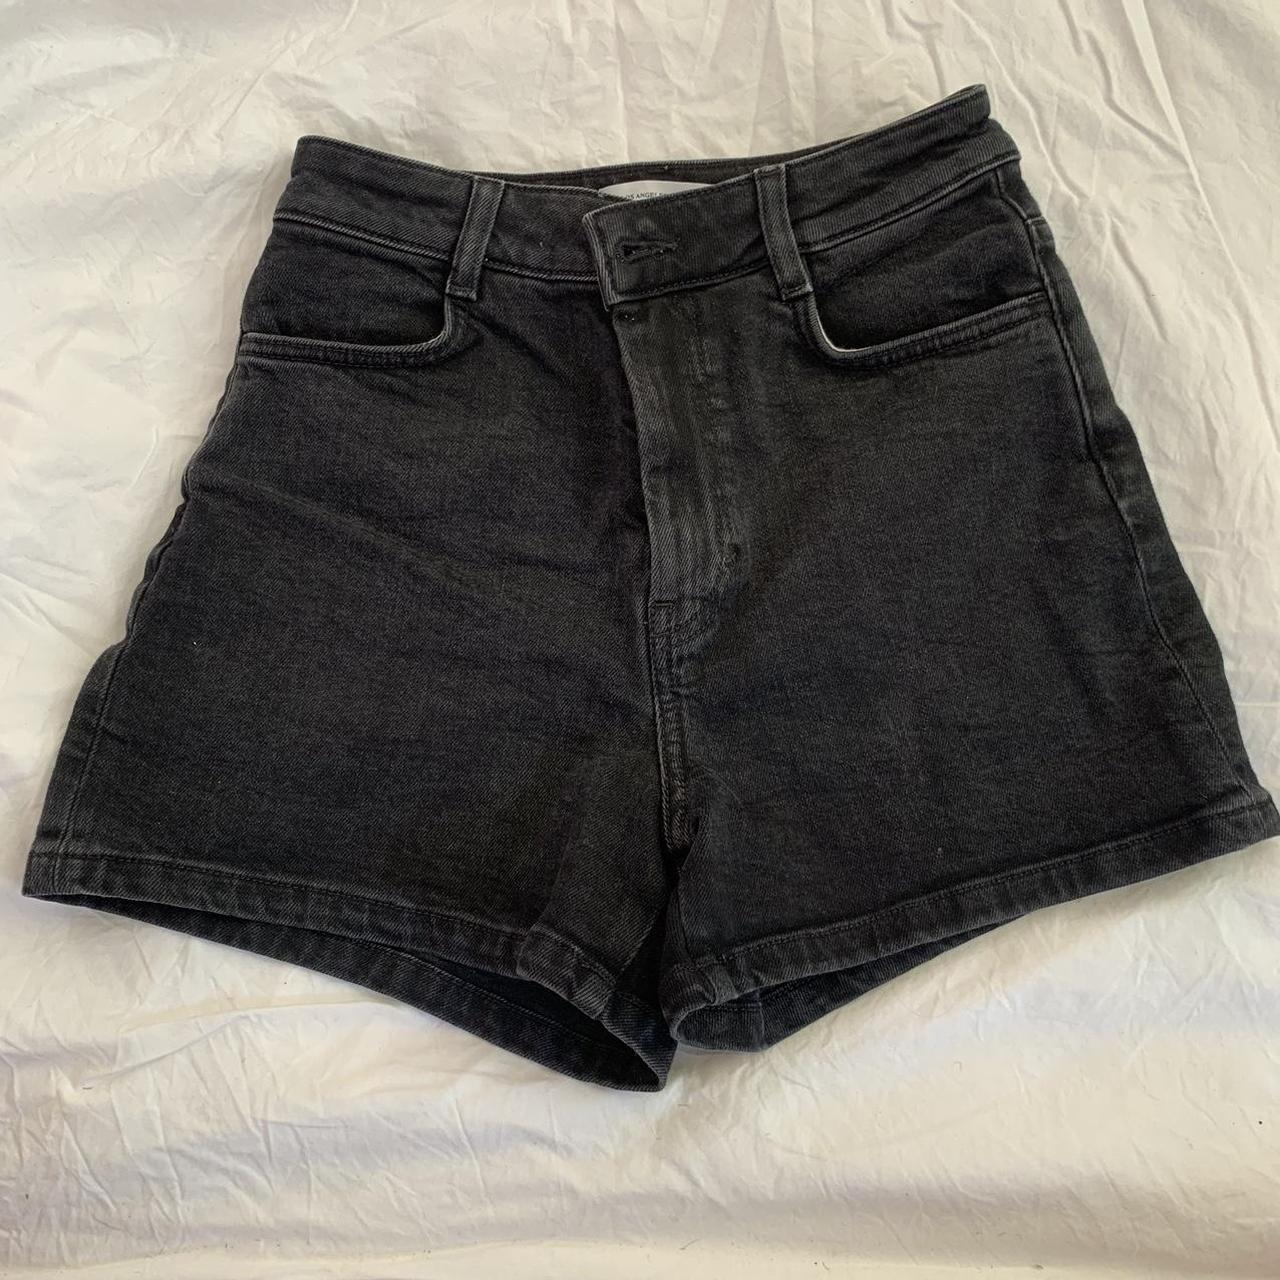 & other stories black shorts stretchy high wasted... - Depop